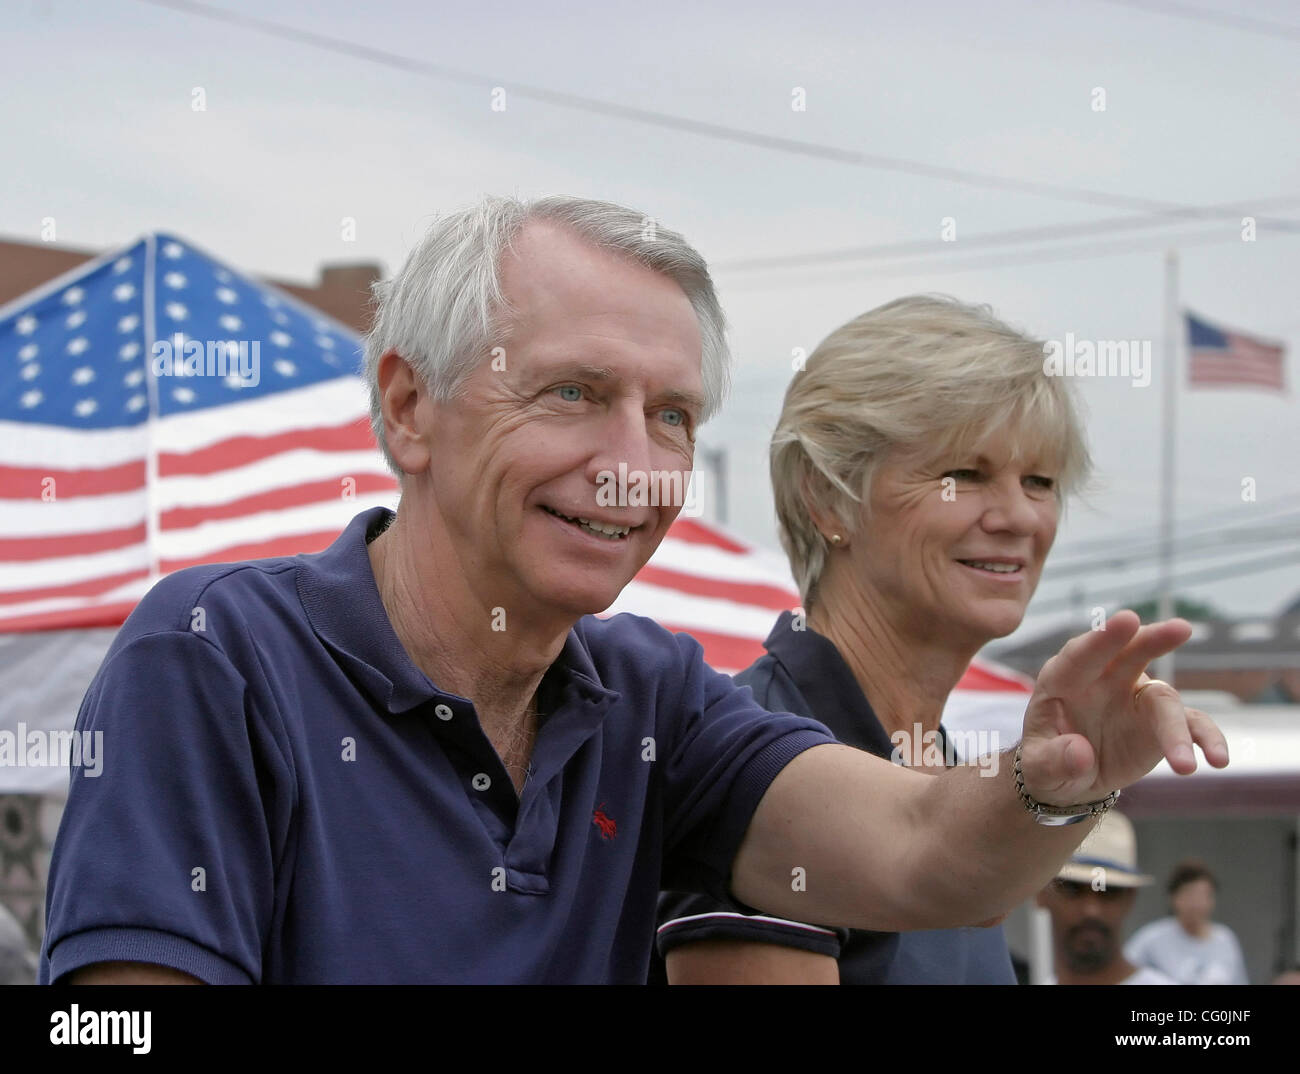 Democratic gubernatorial nominee STEVE BESHEAR (left) waved to supporters as his wife, JANE BESHEAR, looked on during a Fourth of July celebration parade on Main Street. A native of Dawson Springs, Steve has formerly held several elected offices, including lieutenant governor and state attorney gene Stock Photo